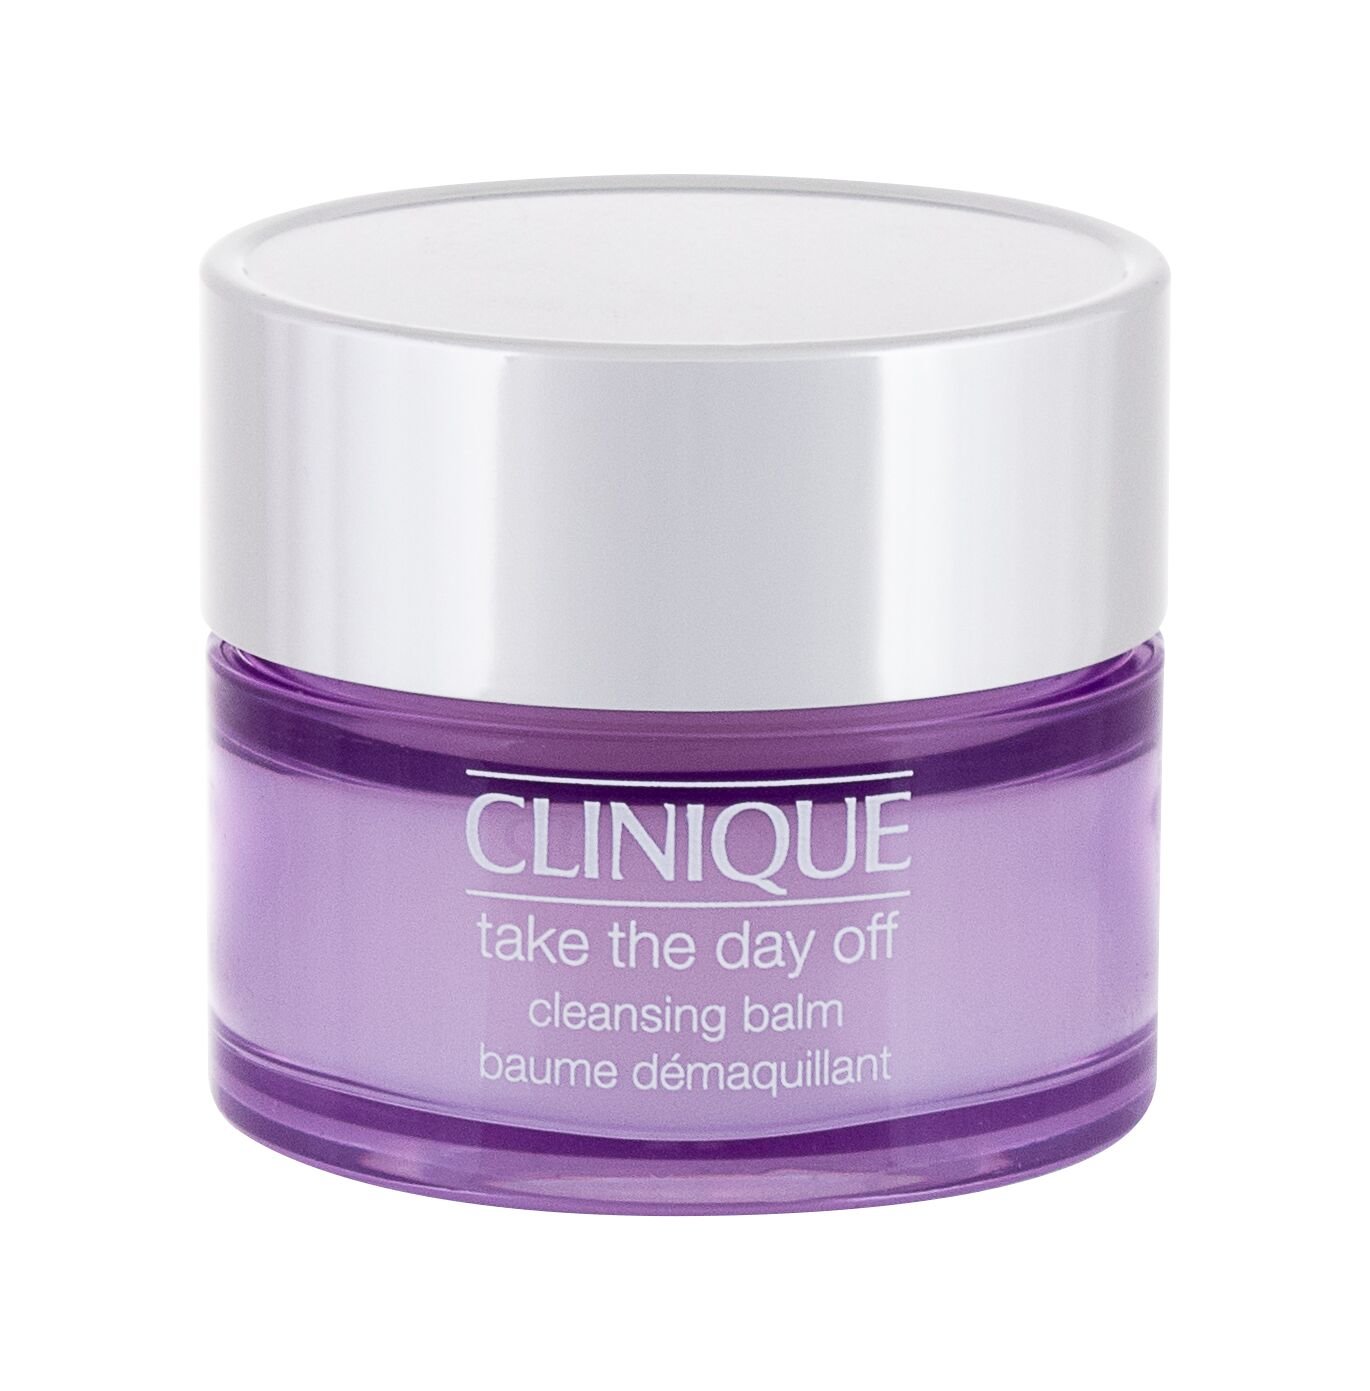 Clinique Take the Day Off Cleansing Balm veido valiklis